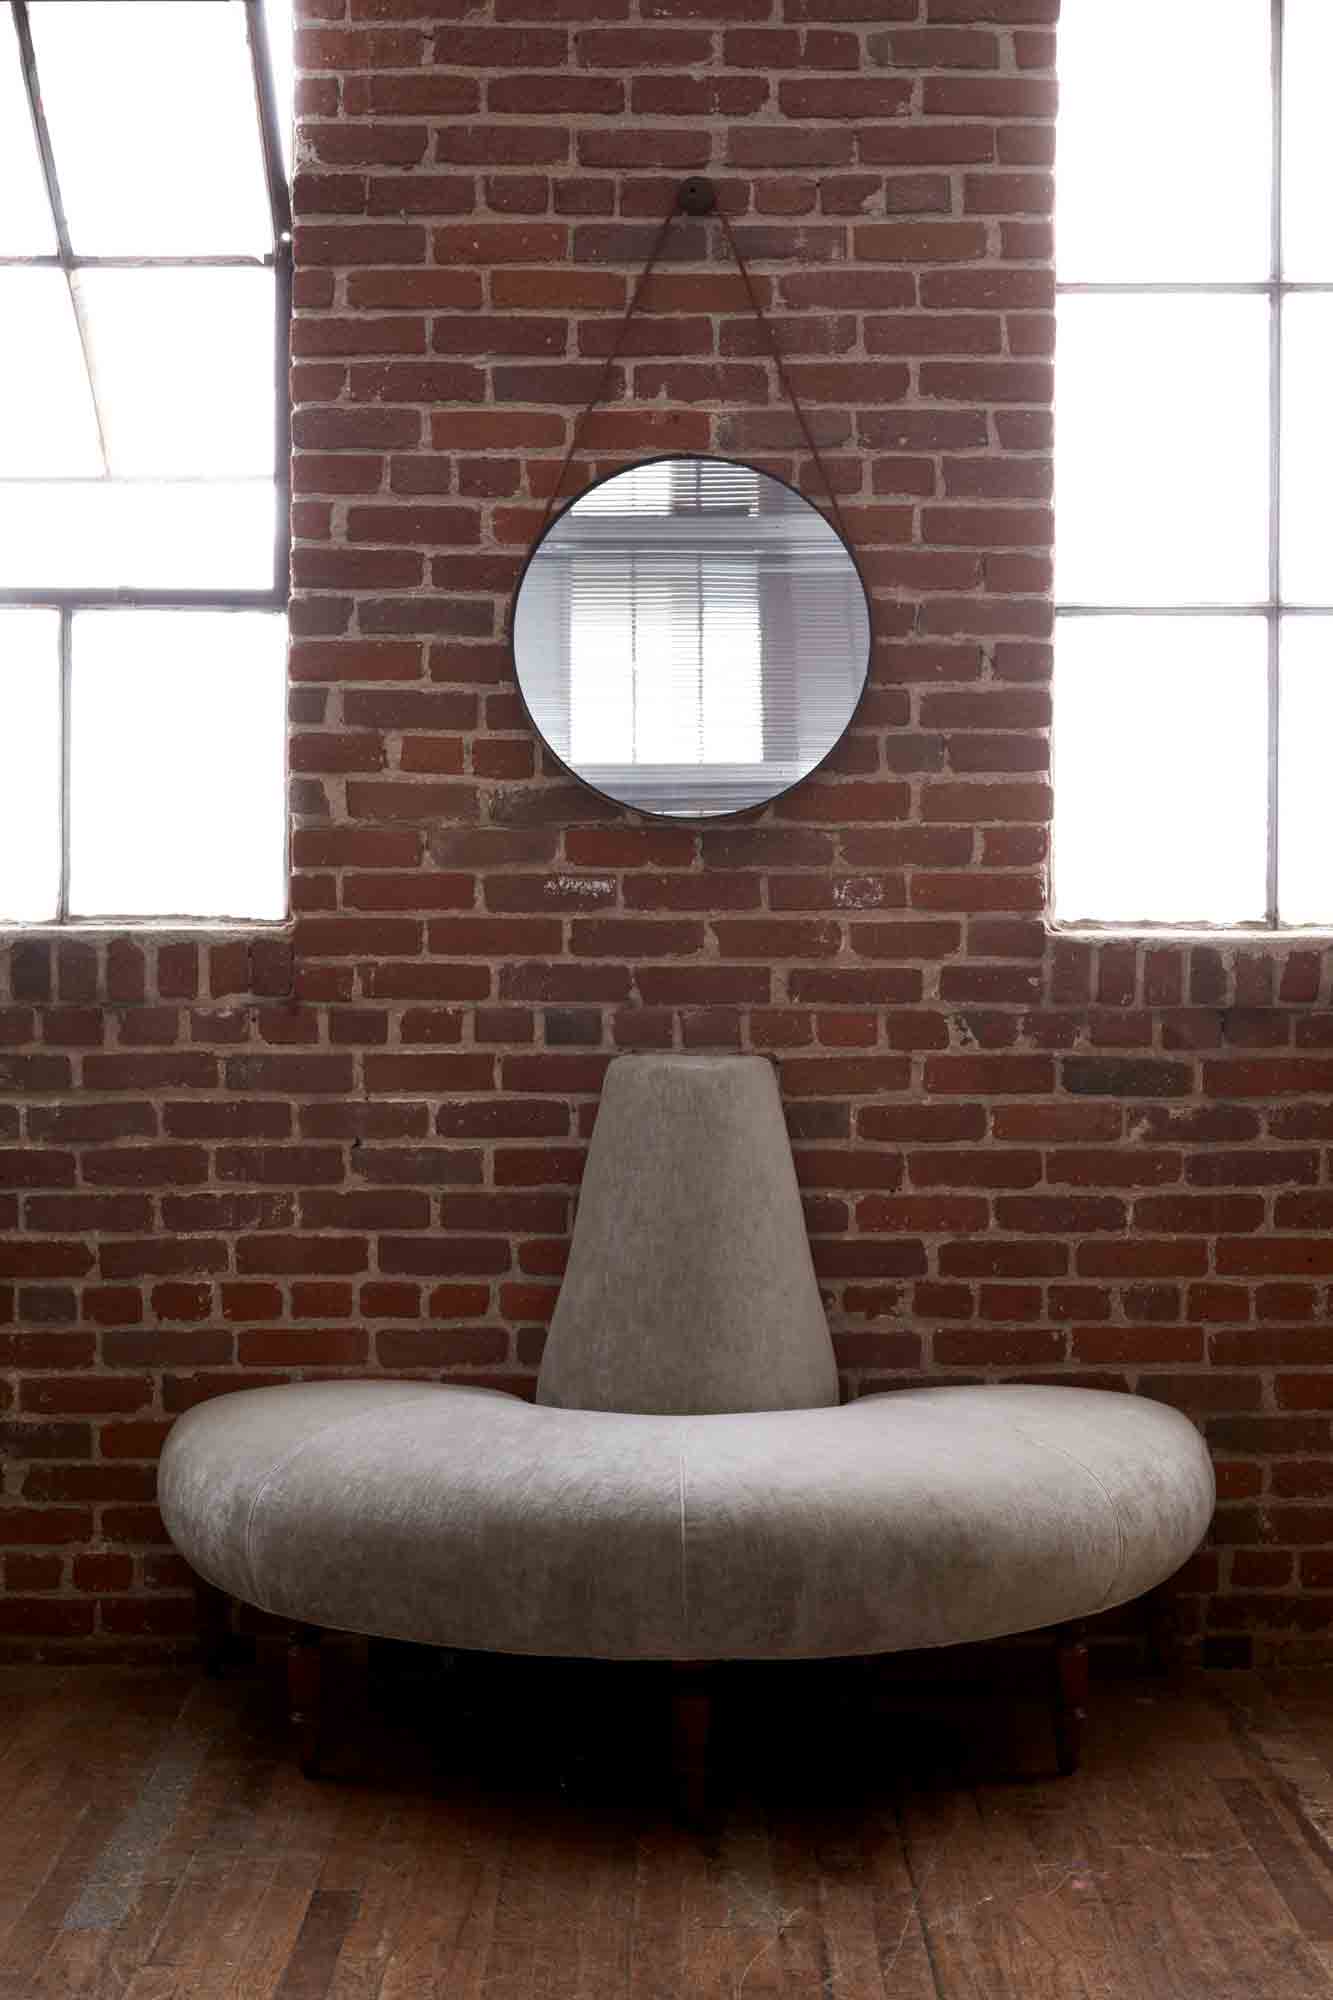  The Half Coin sofa is in Velluto Stone, a natural color velvet, against a brick wall, between 2 windows and a round mirror on the wall. Photographed in Velluto Stone. 